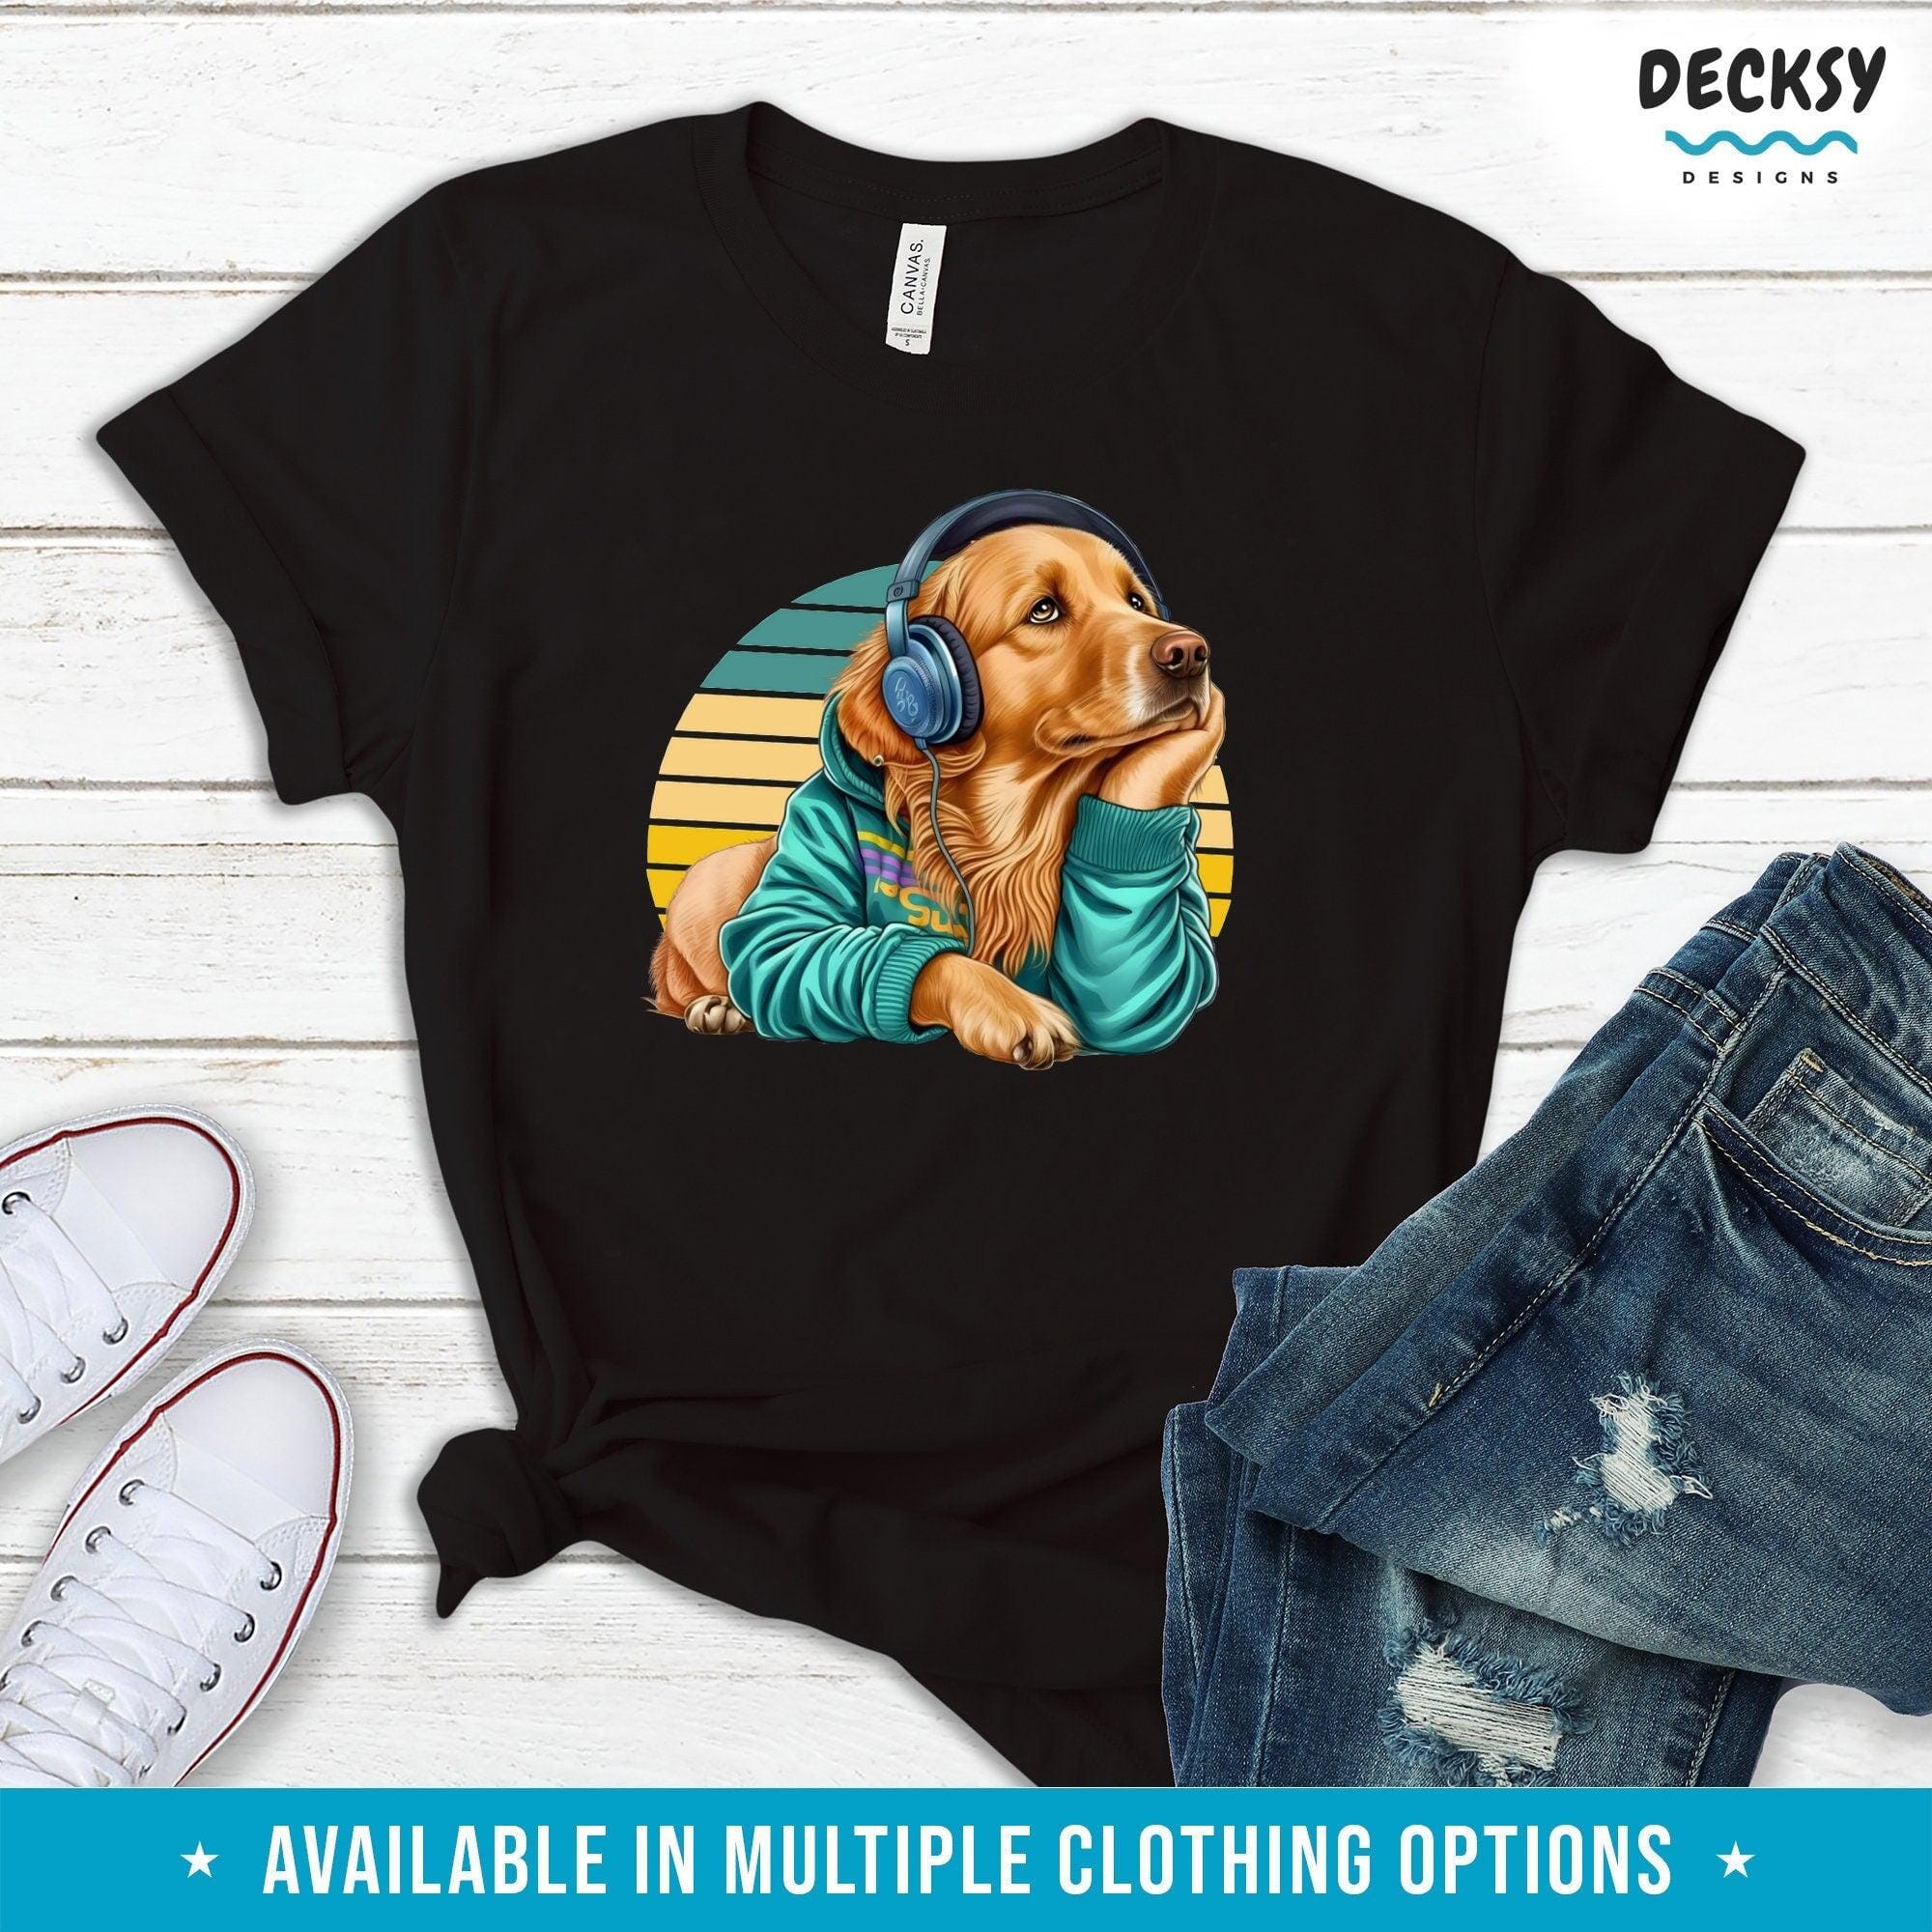 Golden Retriever Dog Shirt, Cute Dog Lover Gift-Clothing:Gender-Neutral Adult Clothing:Tops & Tees:T-shirts:Graphic Tees-DecksyDesigns